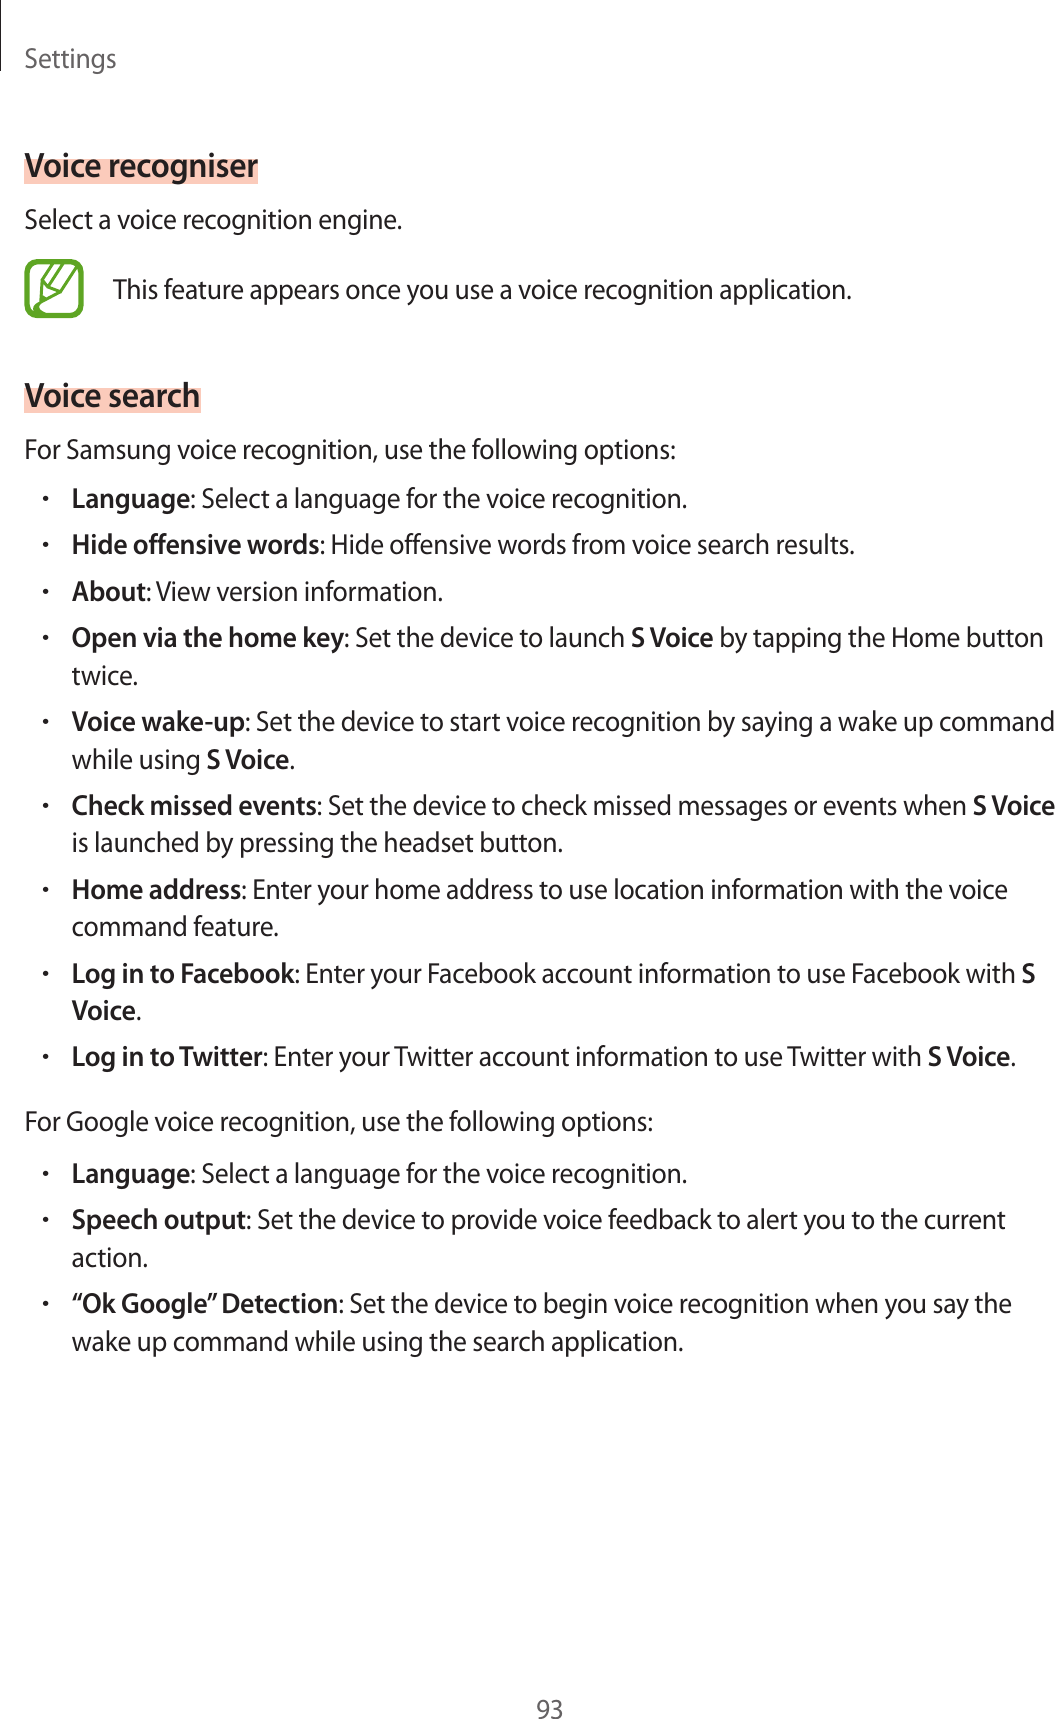 Settings93Voice recogniserSelect a voice recognition engine.This feature appears once you use a voice recognition application.Voice searchFor Samsung voice recognition, use the following options:•Language: Select a language for the voice recognition.•Hide offensive words: Hide offensive words from voice search results.•About: View version information.•Open via the home key: Set the device to launch S Voice by tapping the Home button twice.•Voice wake-up: Set the device to start voice recognition by saying a wake up command while using S Voice.•Check missed events: Set the device to check missed messages or events when S Voice is launched by pressing the headset button.•Home address: Enter your home address to use location information with the voice command feature.•Log in to Facebook: Enter your Facebook account information to use Facebook with S Voice.•Log in to Twitter: Enter your Twitter account information to use Twitter with S Voice.For Google voice recognition, use the following options:•Language: Select a language for the voice recognition.•Speech output: Set the device to provide voice feedback to alert you to the current action.•“Ok Google” Detection: Set the device to begin voice recognition when you say the wake up command while using the search application.